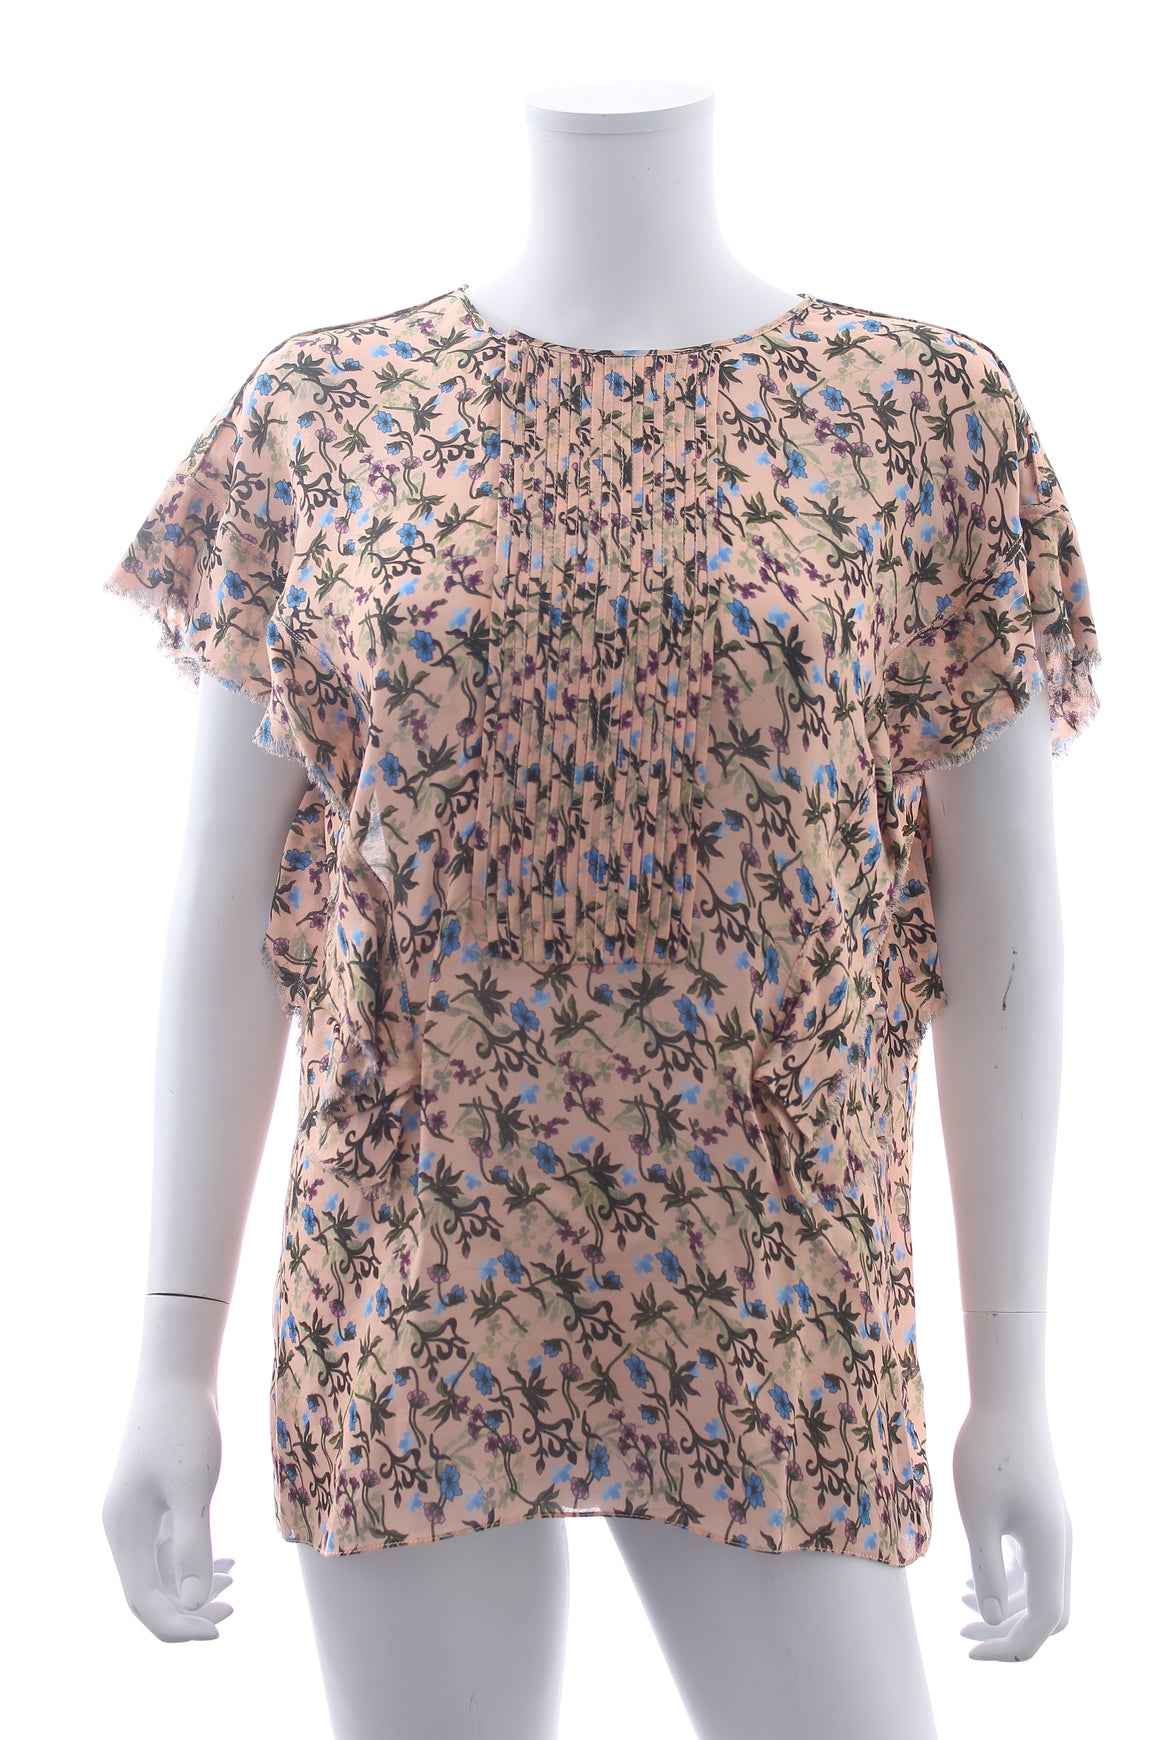 Chloé Floral Printed Short Sleeved Blouse